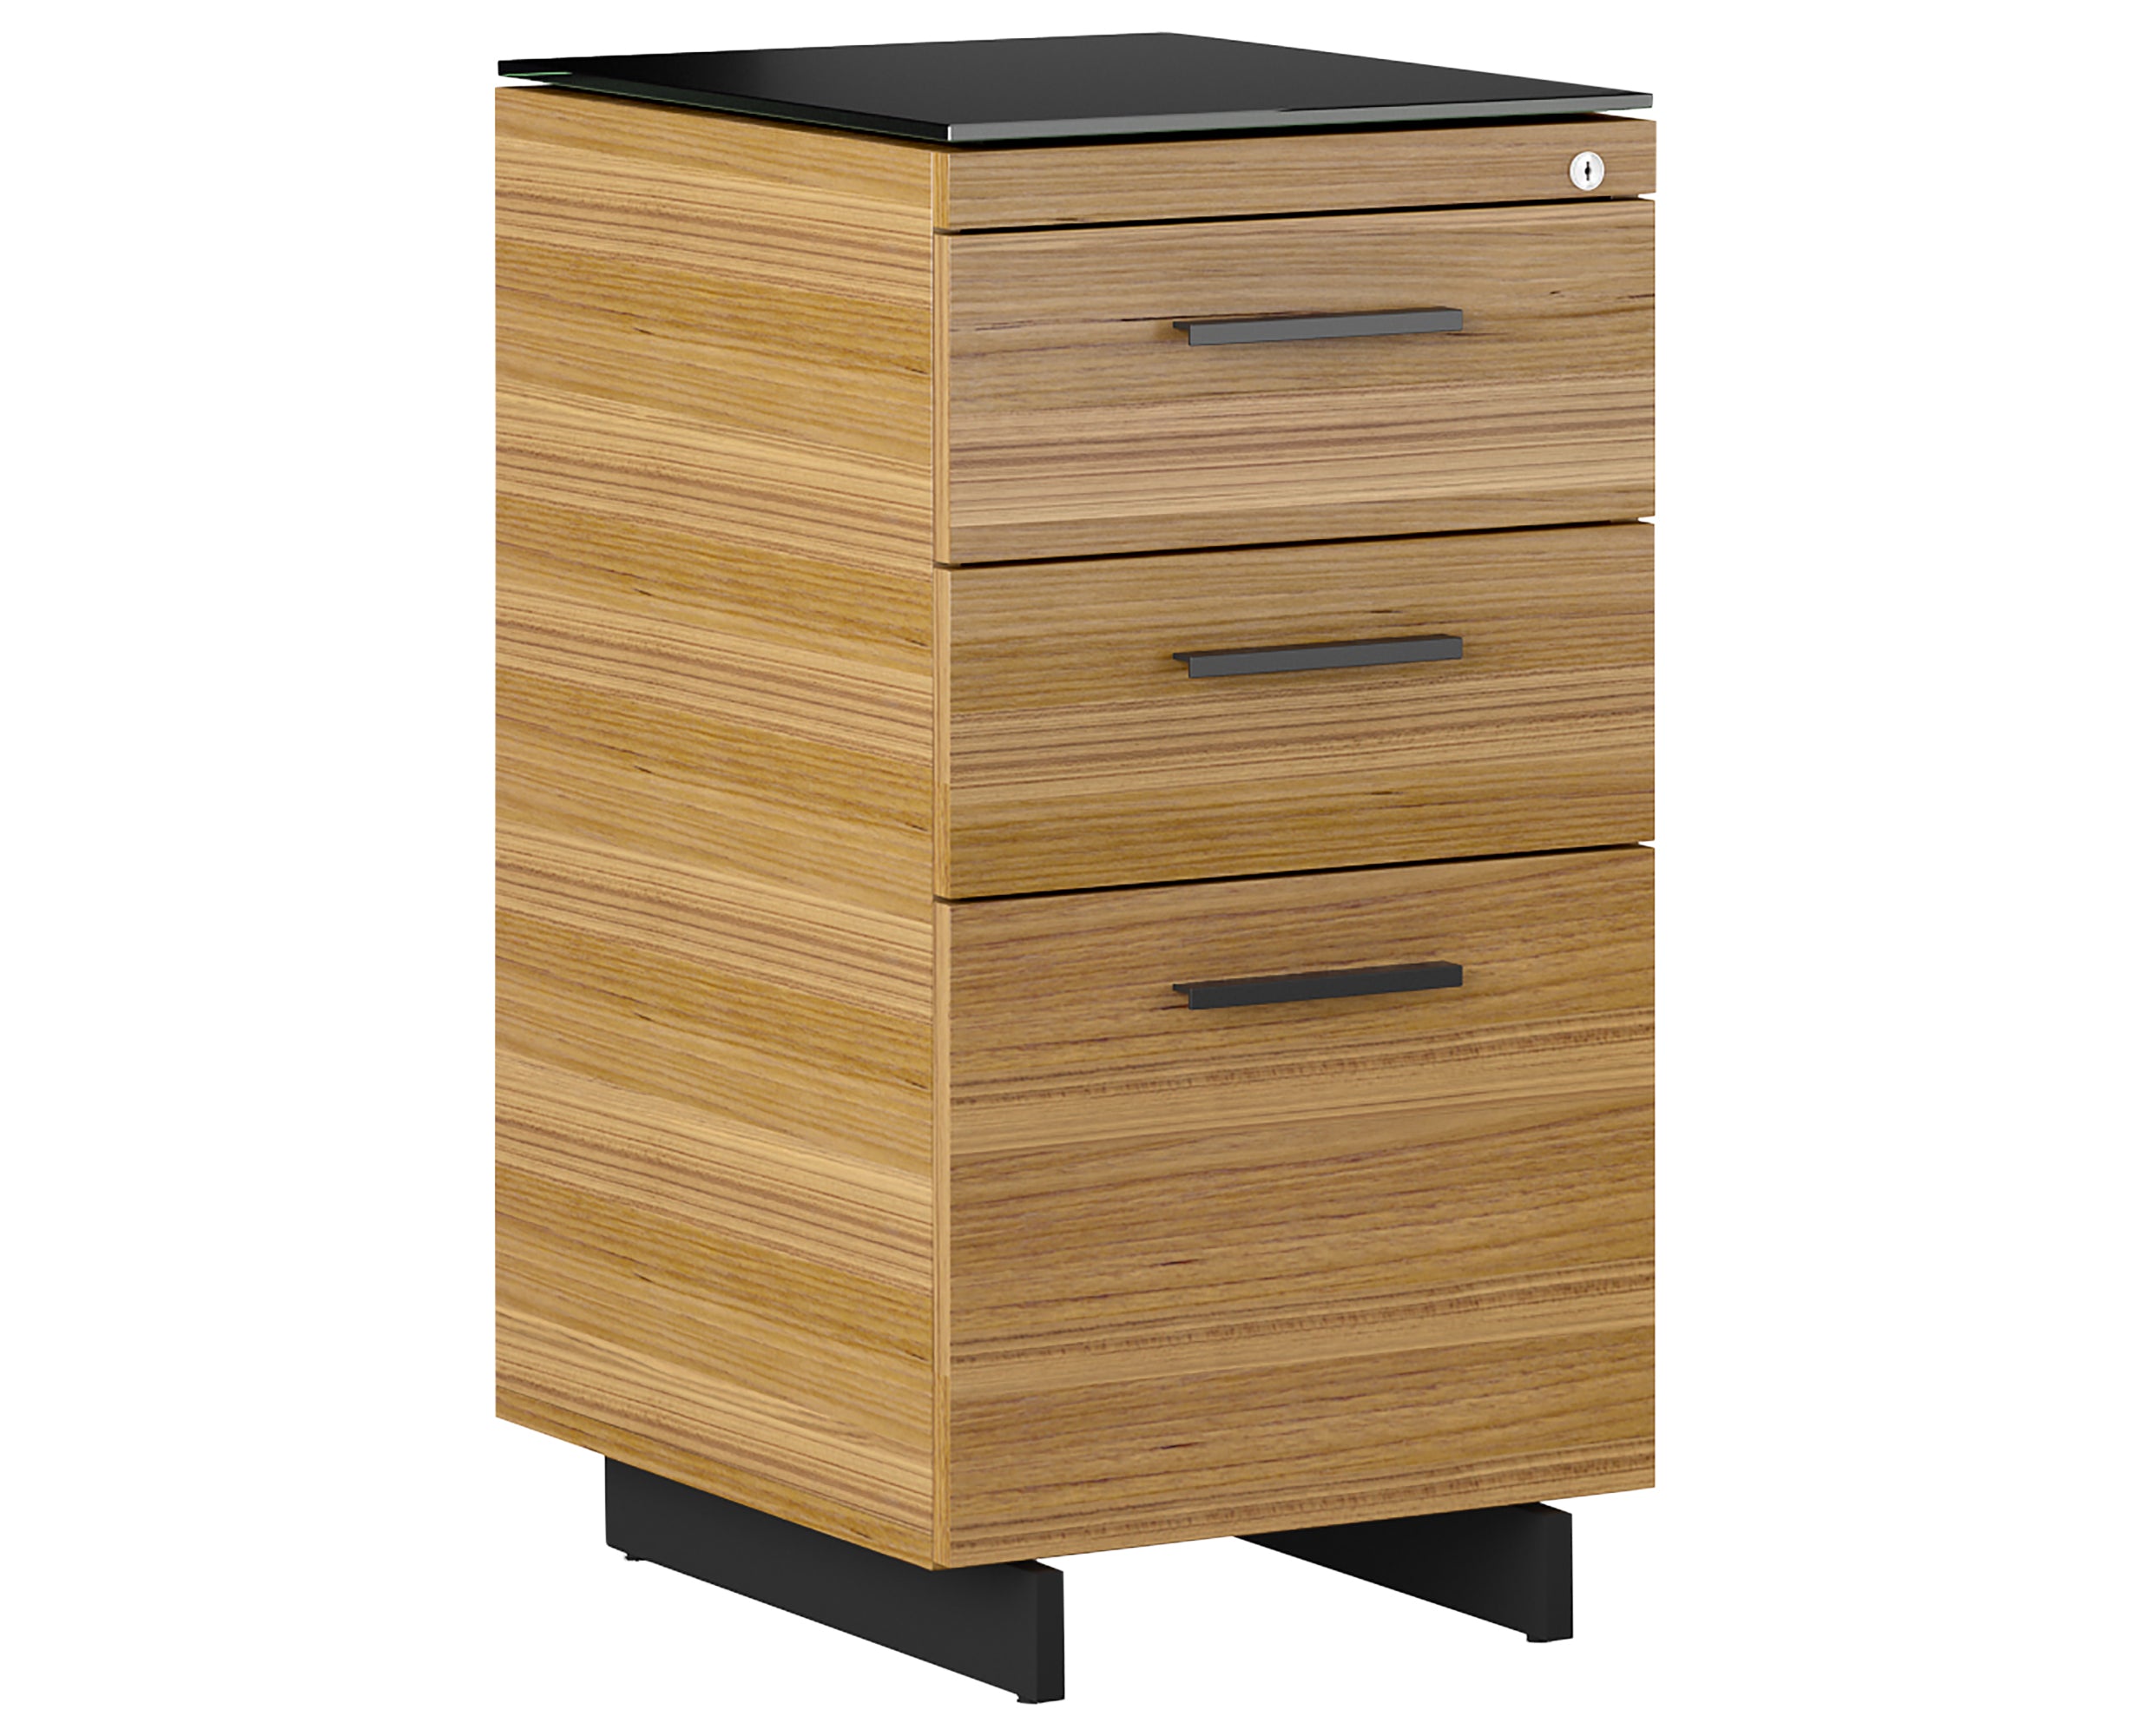 Natural Walnut Veneer and Black Satin-Etched Glass with Black Steel | BDI Sequel 3 Drawer File Cabinet | Valley Ridge Furniture